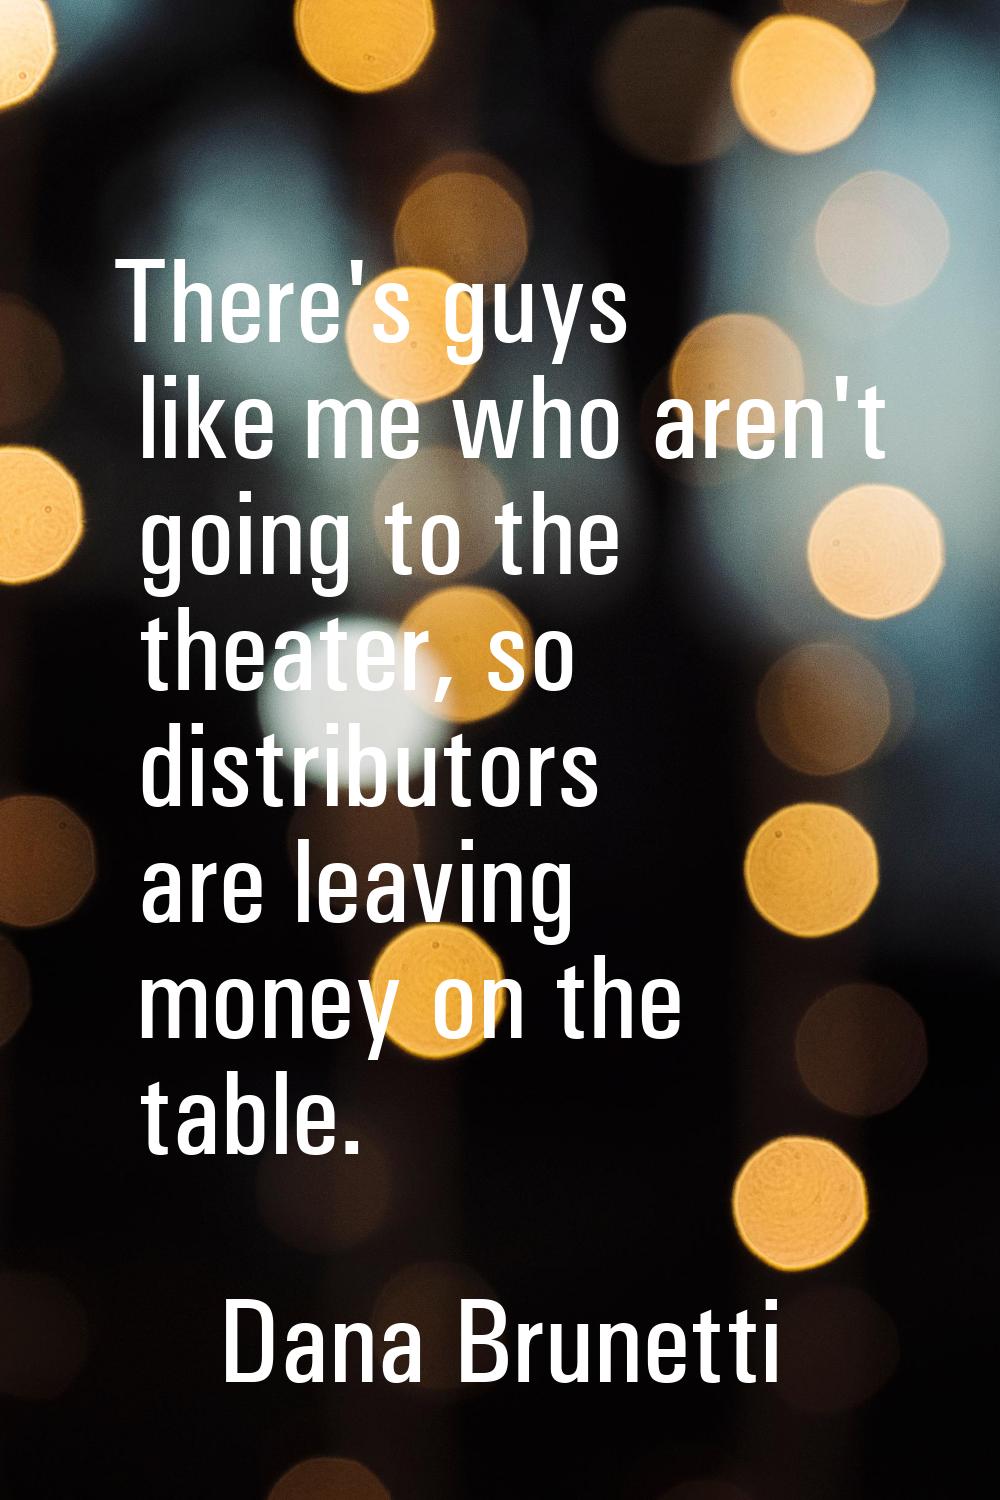 There's guys like me who aren't going to the theater, so distributors are leaving money on the tabl